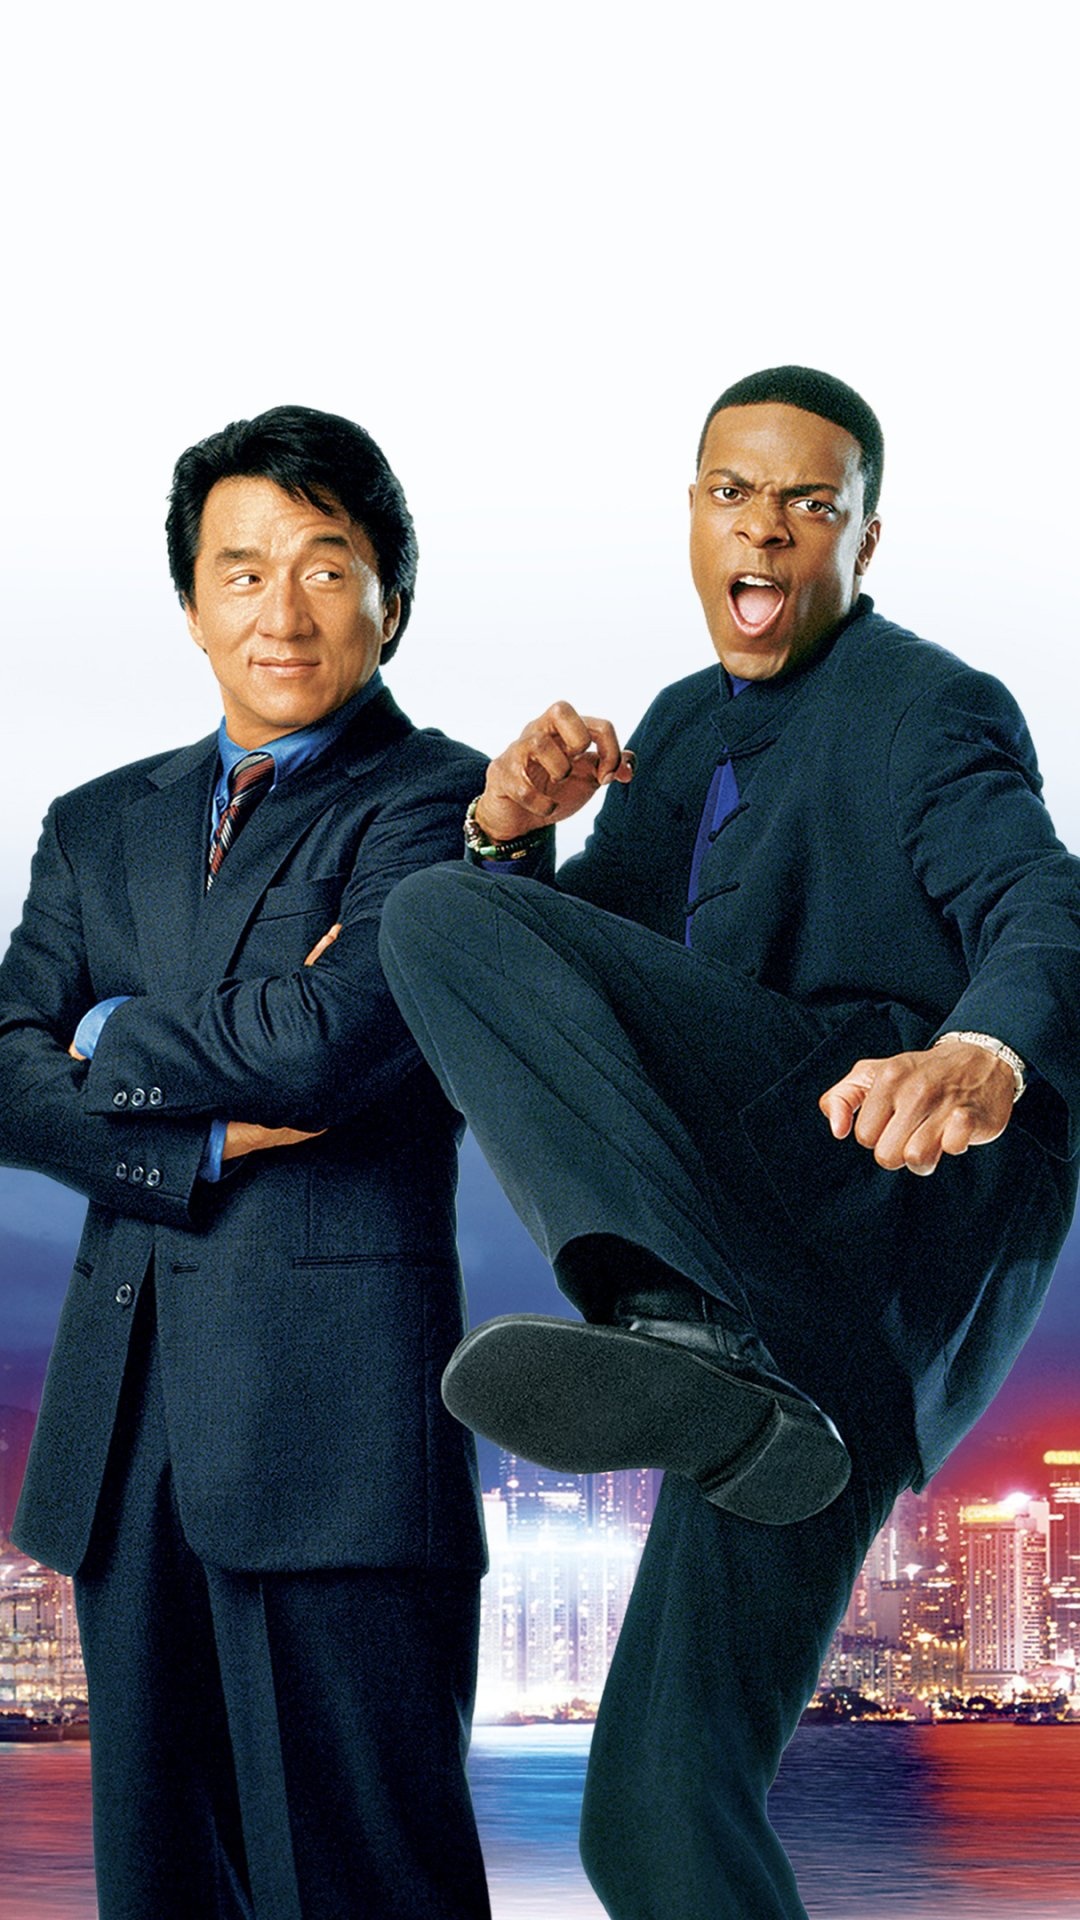 Rush Hour, Hilarious mismatched duo, Frenetic urban setting, Undercover operation, 1080x1920 Full HD Handy